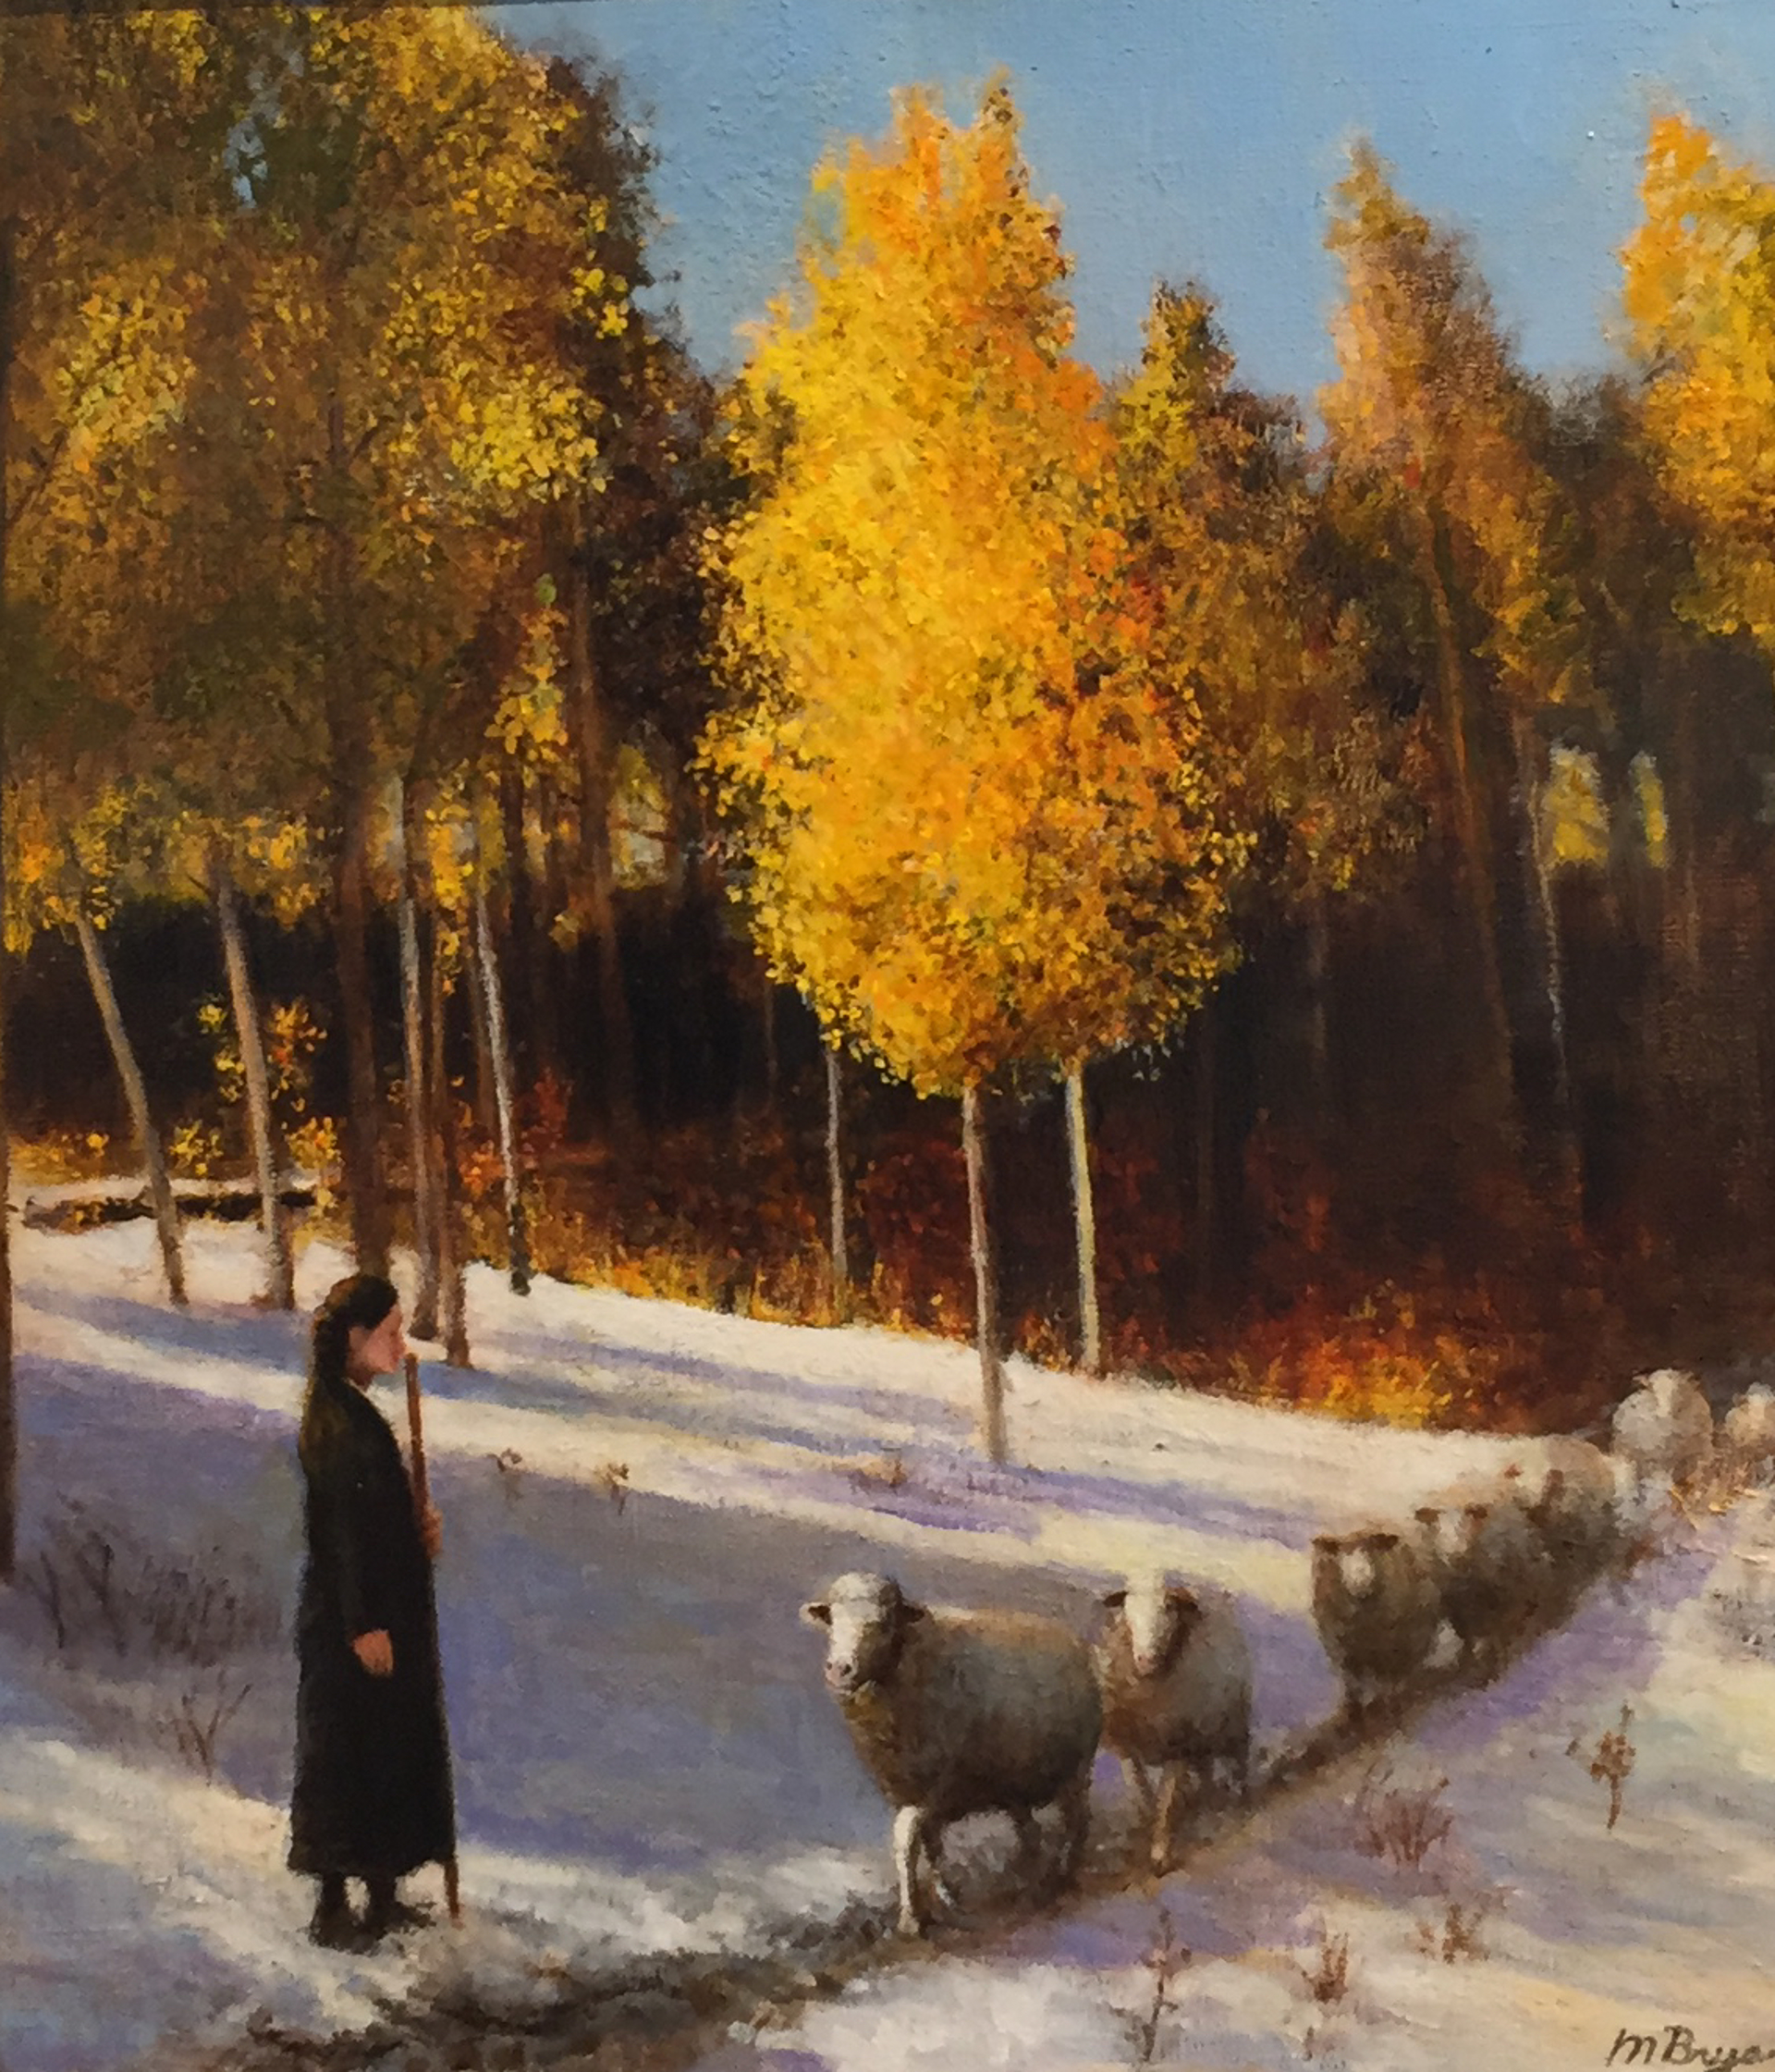 On the Way Home - First Snow by Malcolm Bryan